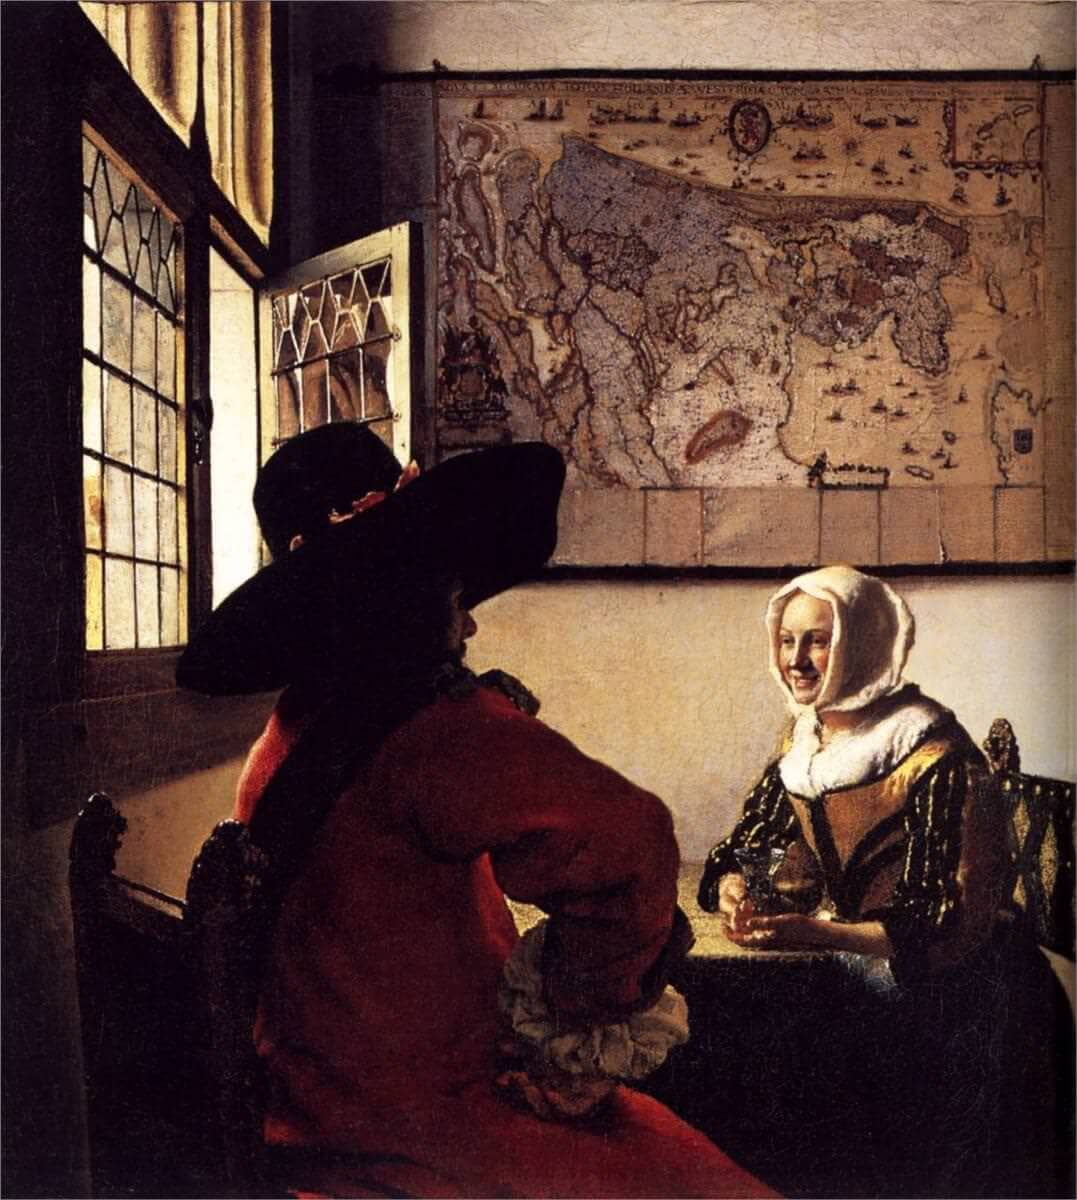 Officer and Laughing Girl, 1658 by Johannes Vermeer